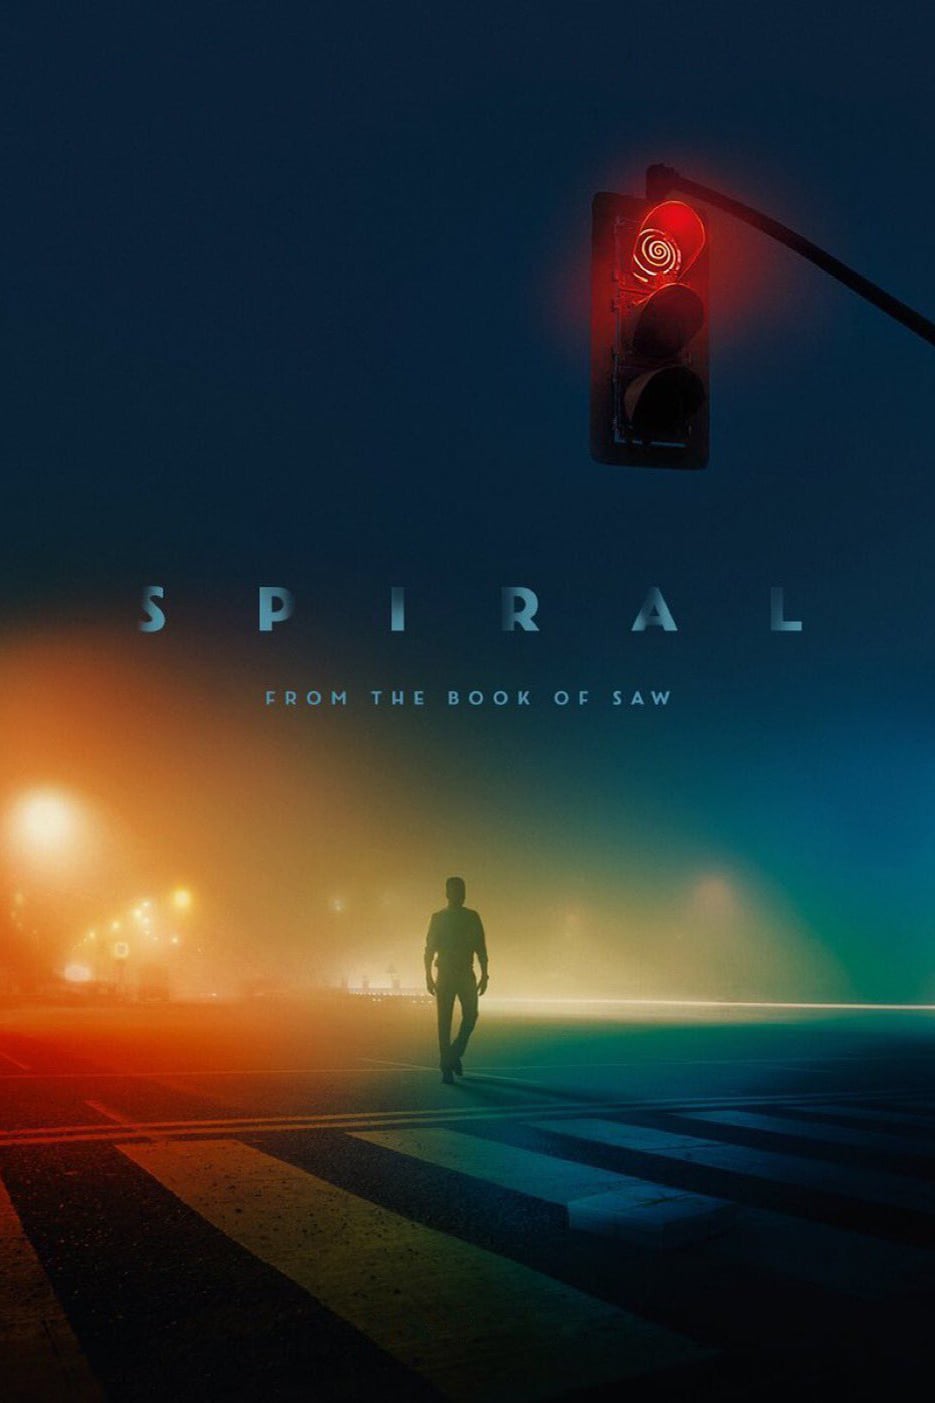 Poster for the movie "Spiral: From the Book of Saw"